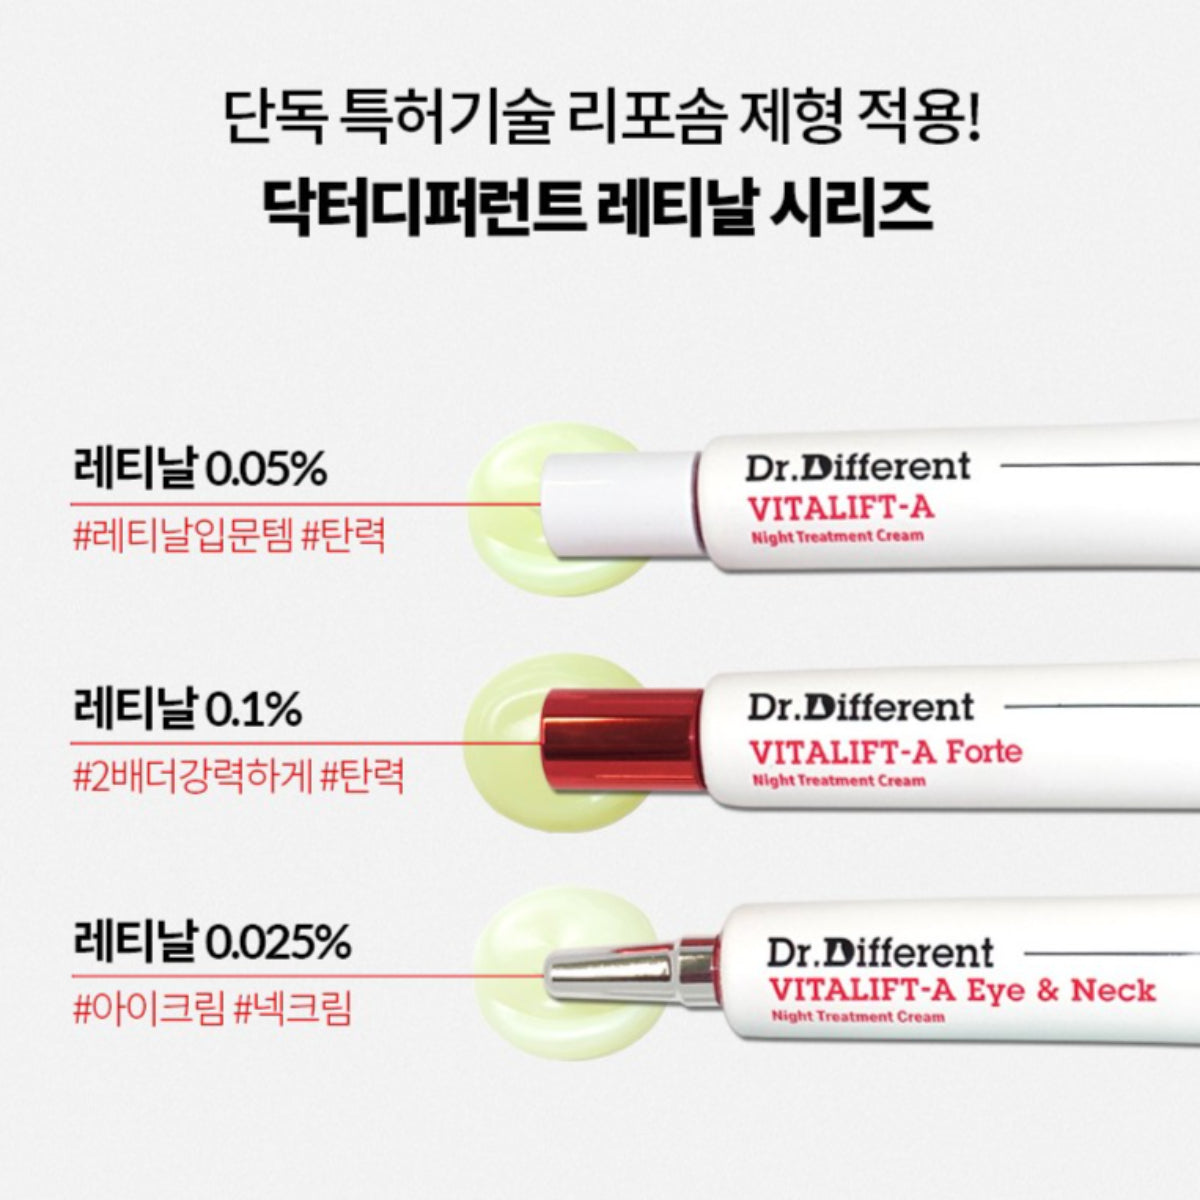 Dr.Different VITALIFT-A Forte 20g Retinal 0.1% Vitamin A Cream (+ Free Gift : Barrier Balance Deep Cream 40ml) Anti-aging Wrinkle Care Lifting Moisturizing / from Seoul, Korea